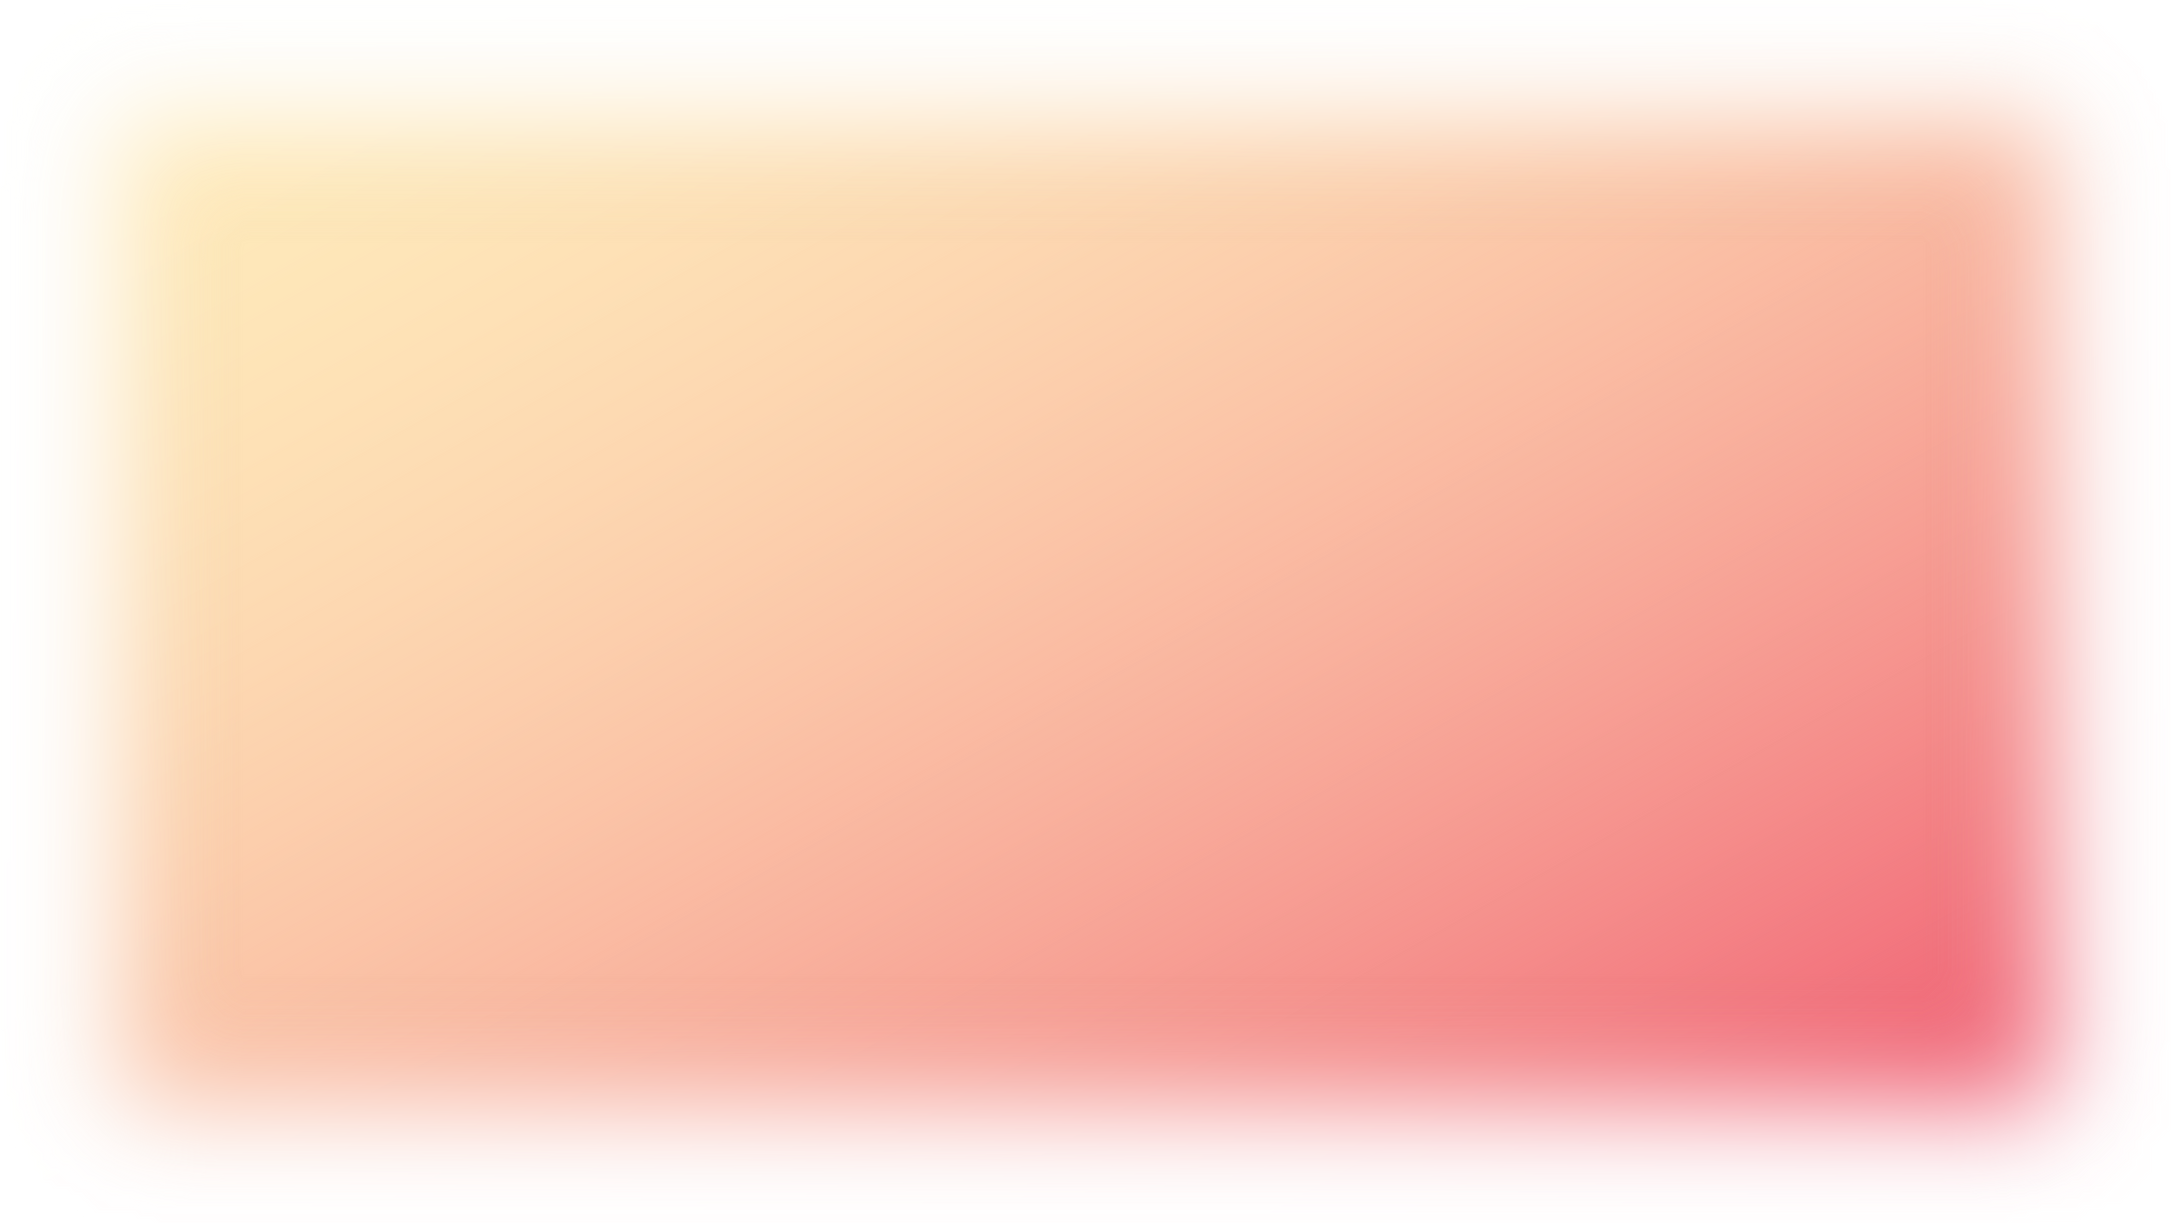 Gradient Blurred Rectangle